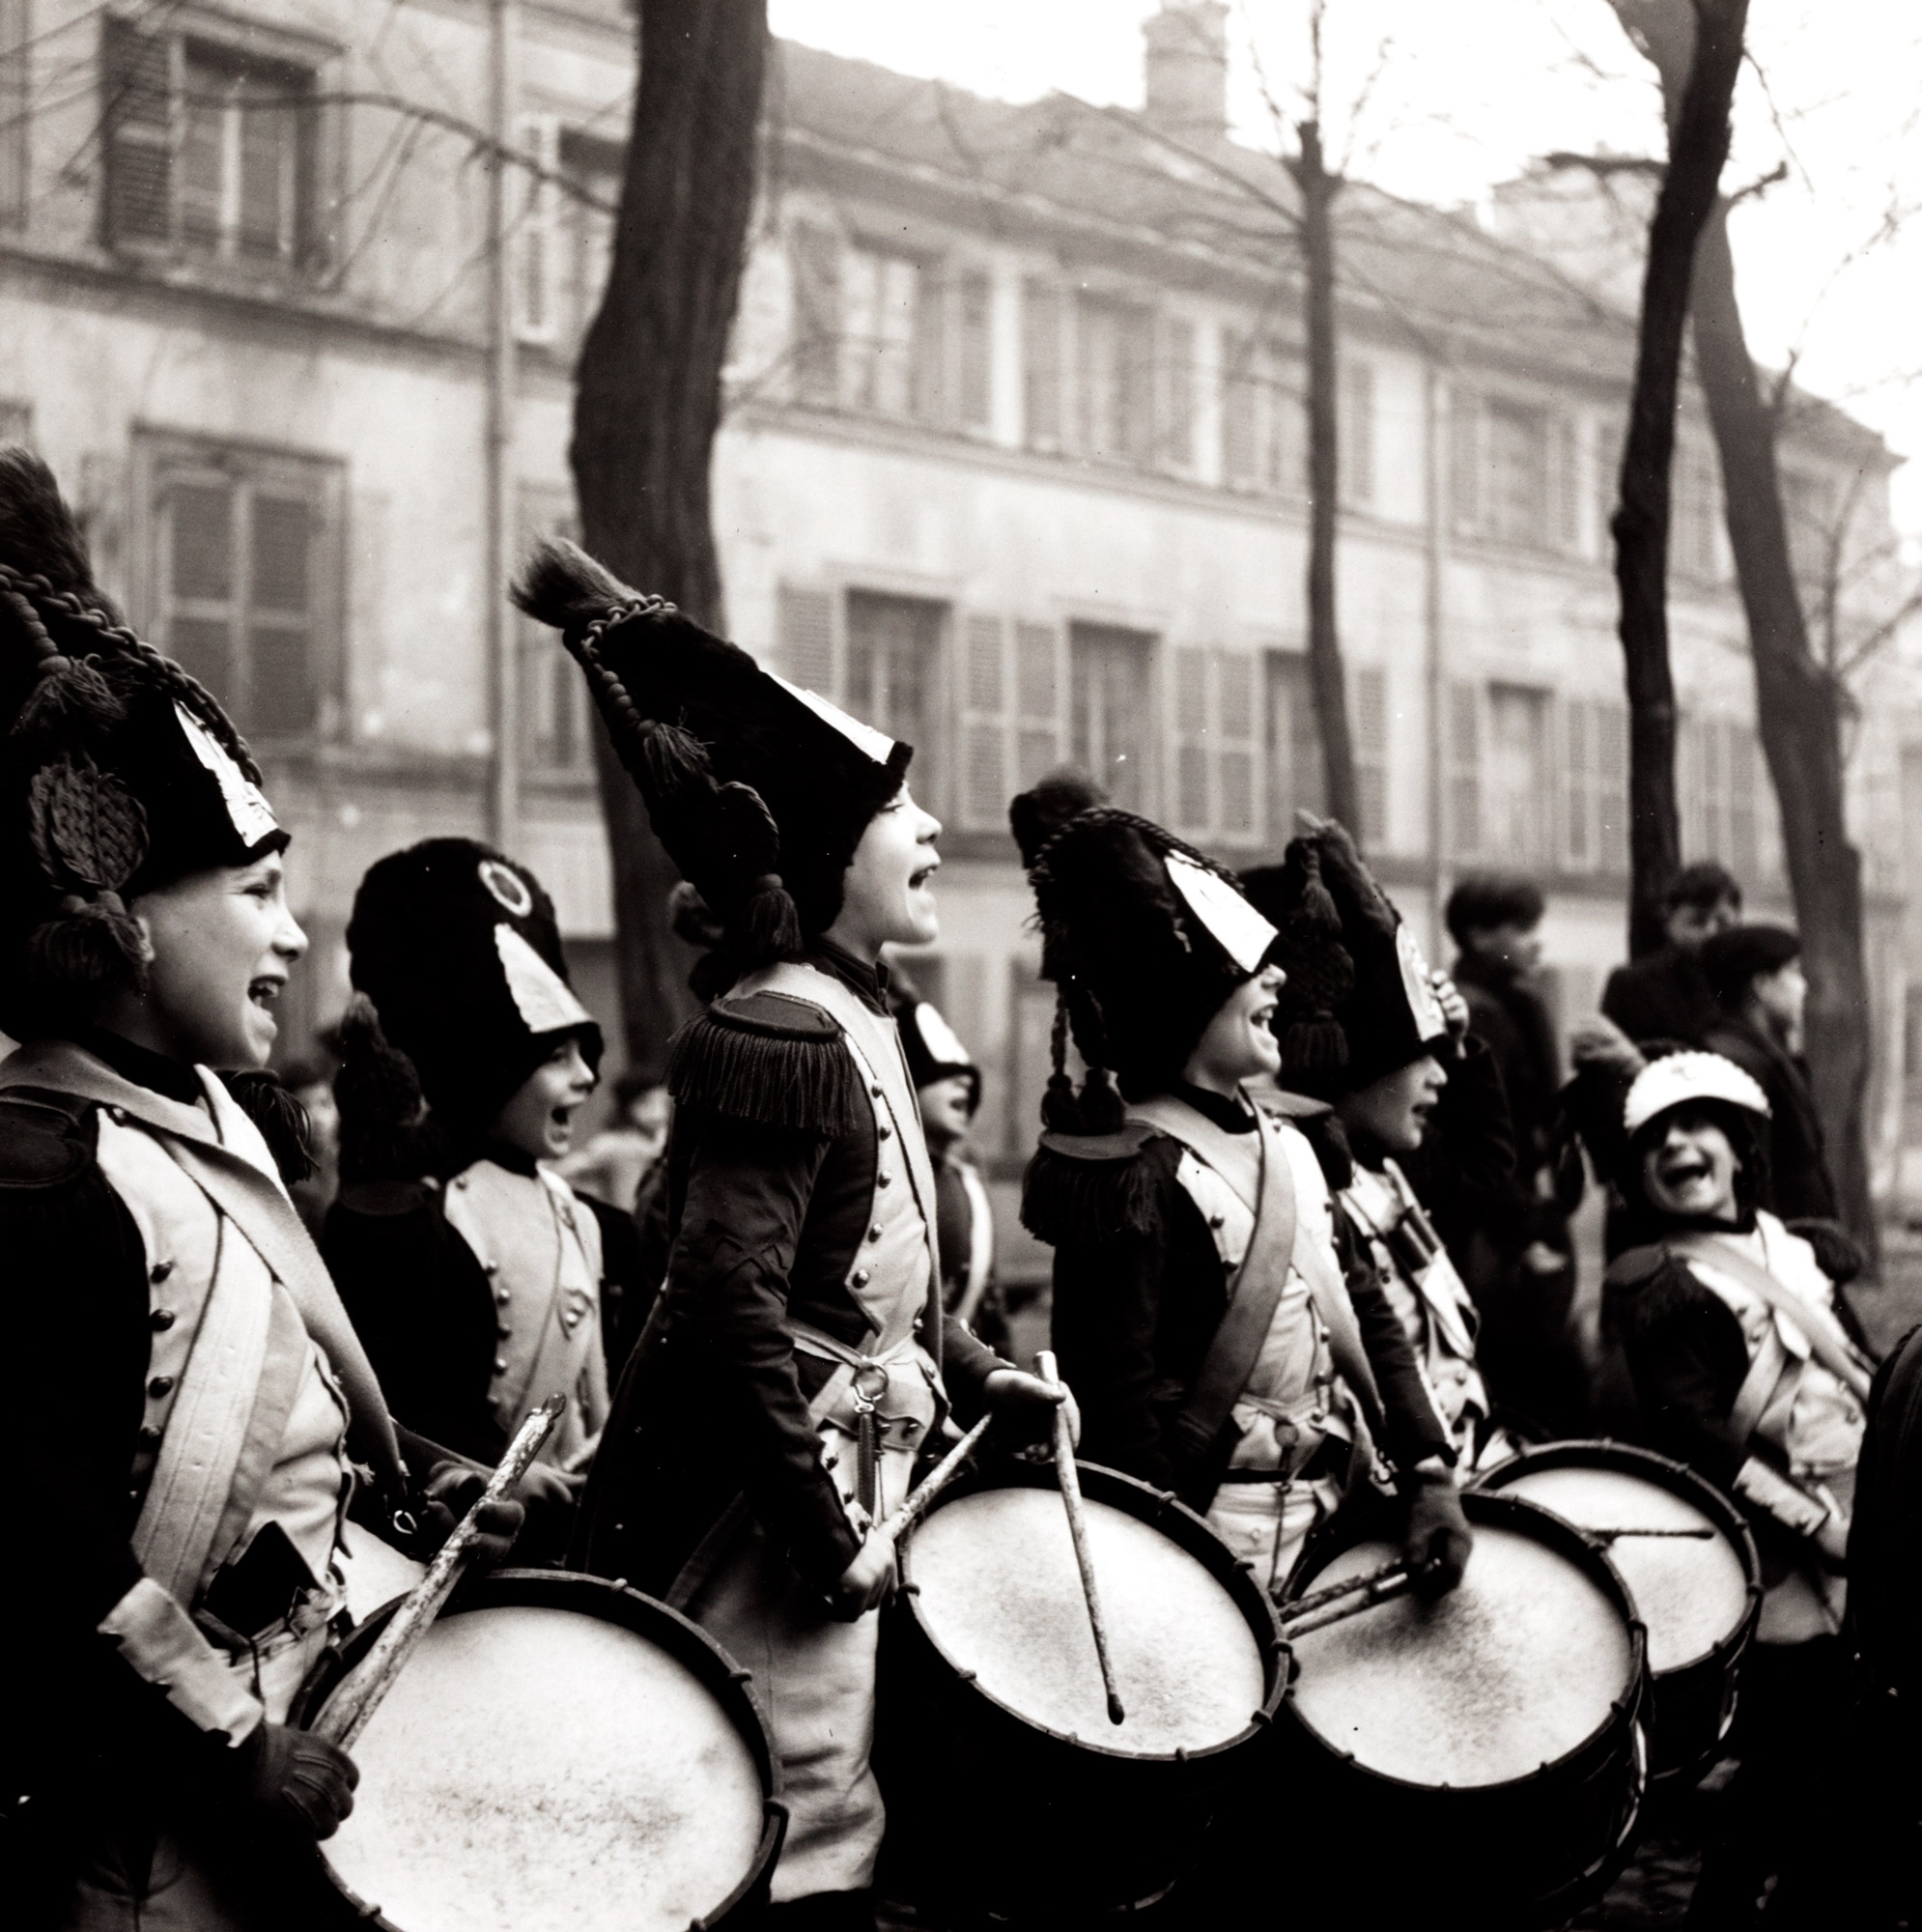 Untitled (Musical band) by Robert Doisneau, Years 1940, printed later